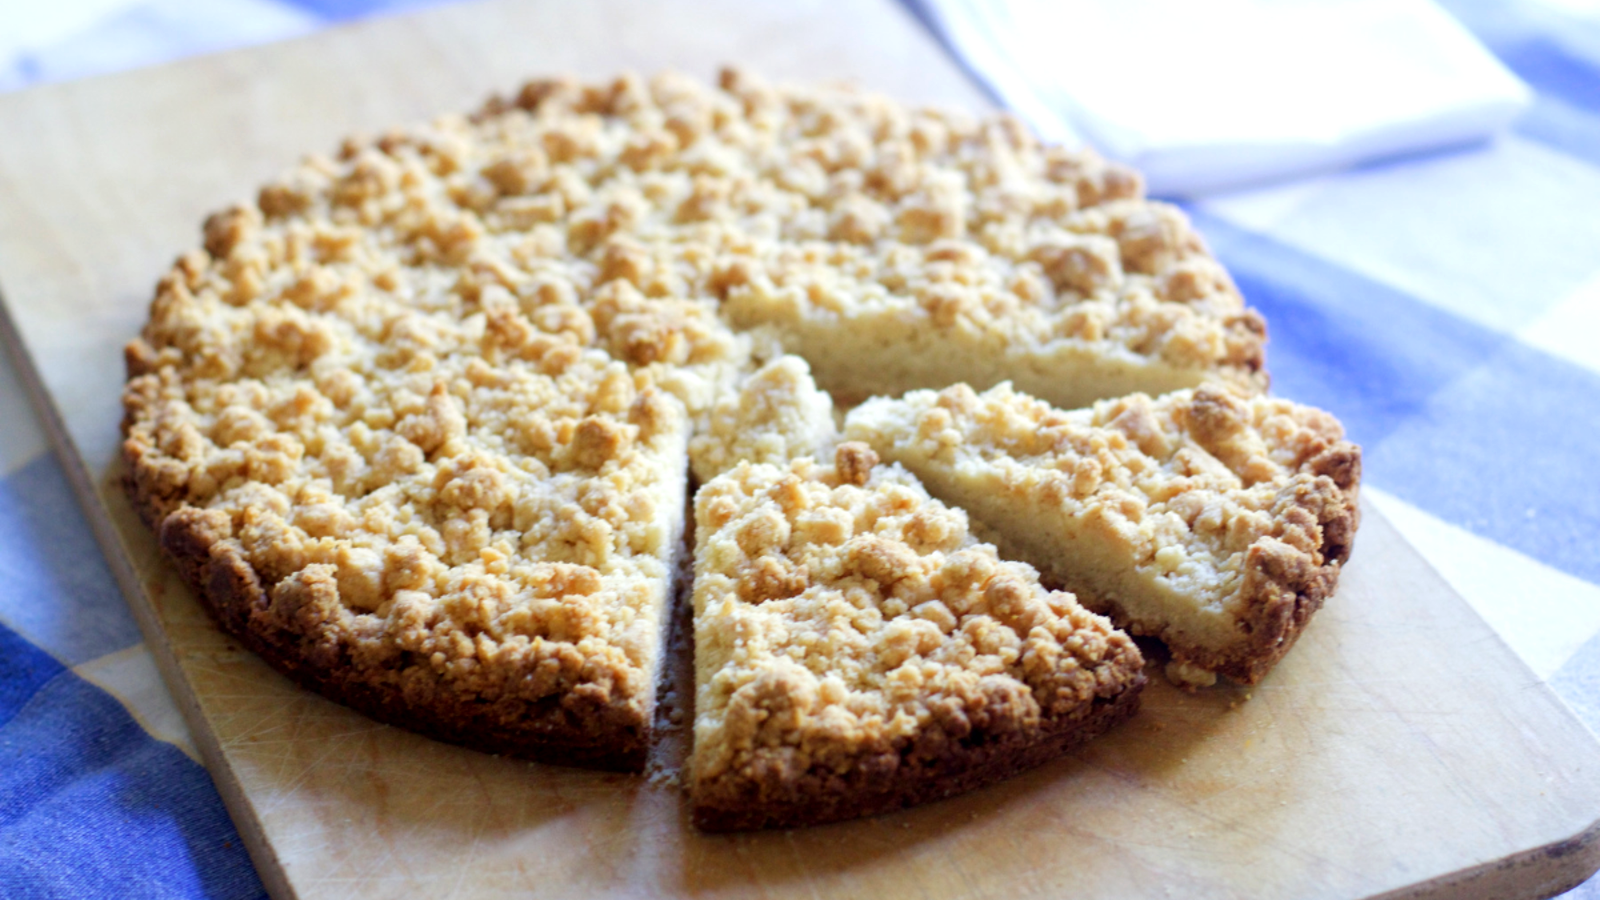 Image of Giant Almond Crumb Cookie